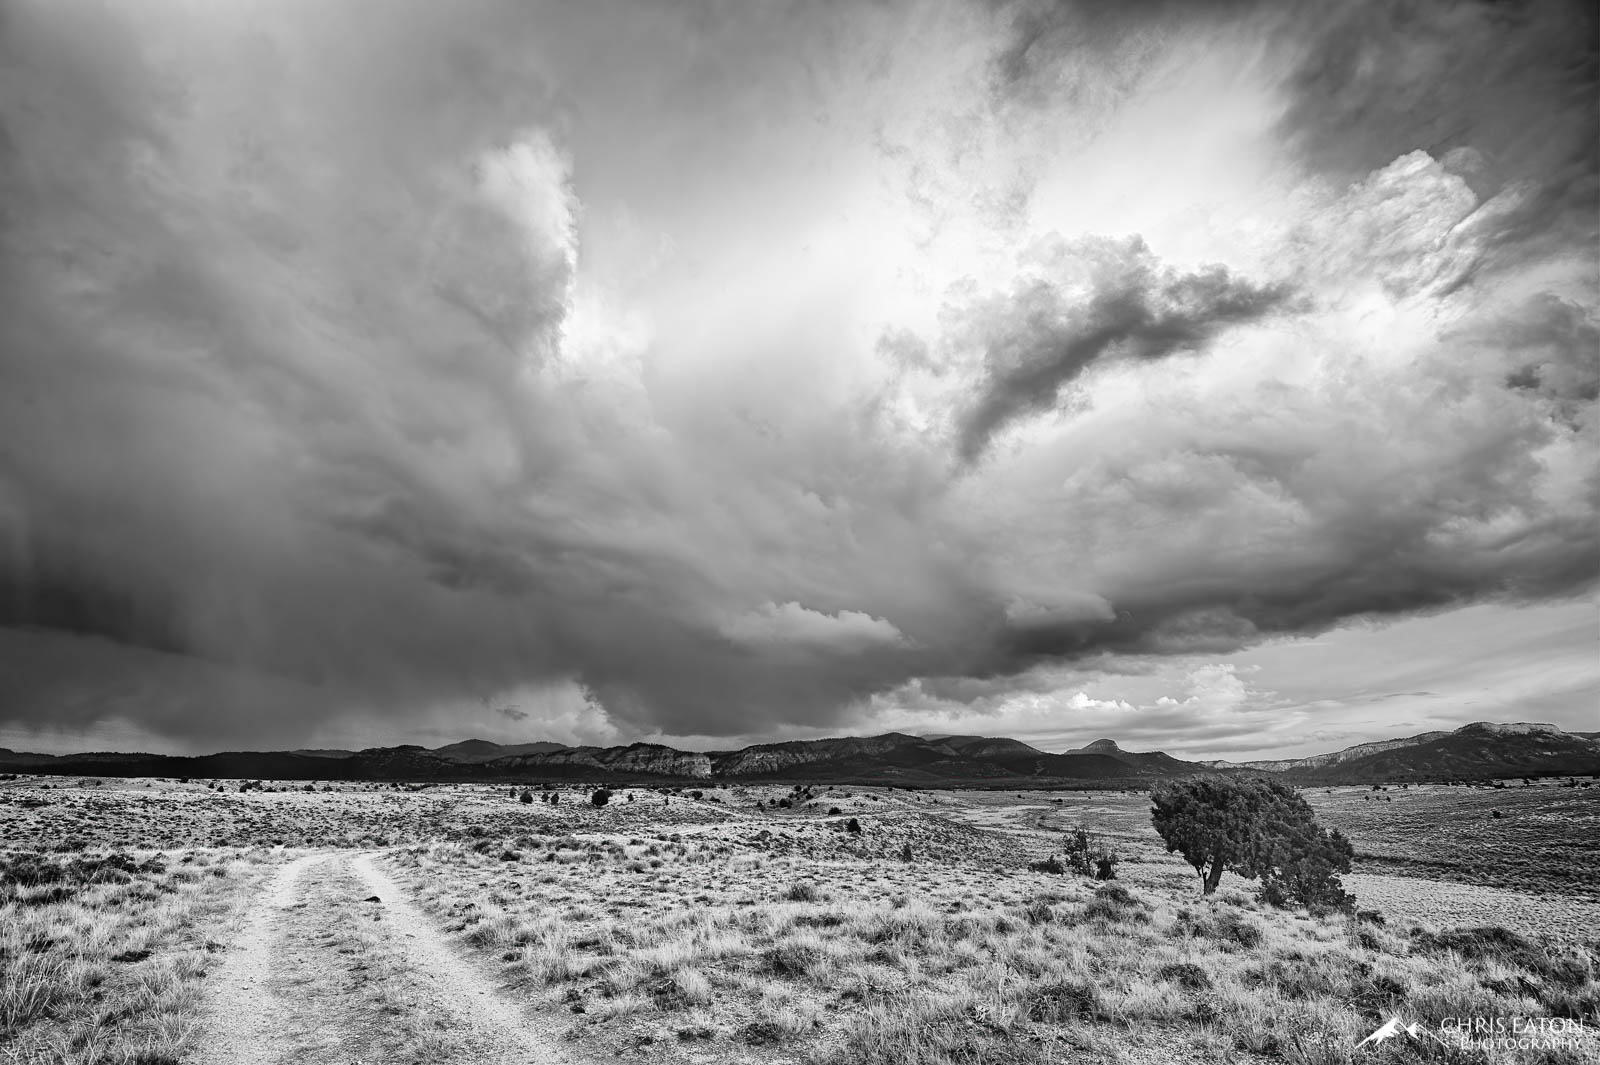 There is nothing more interesting than a dirt road that leads you into a undiscovered landscape; especially when a storm cell...